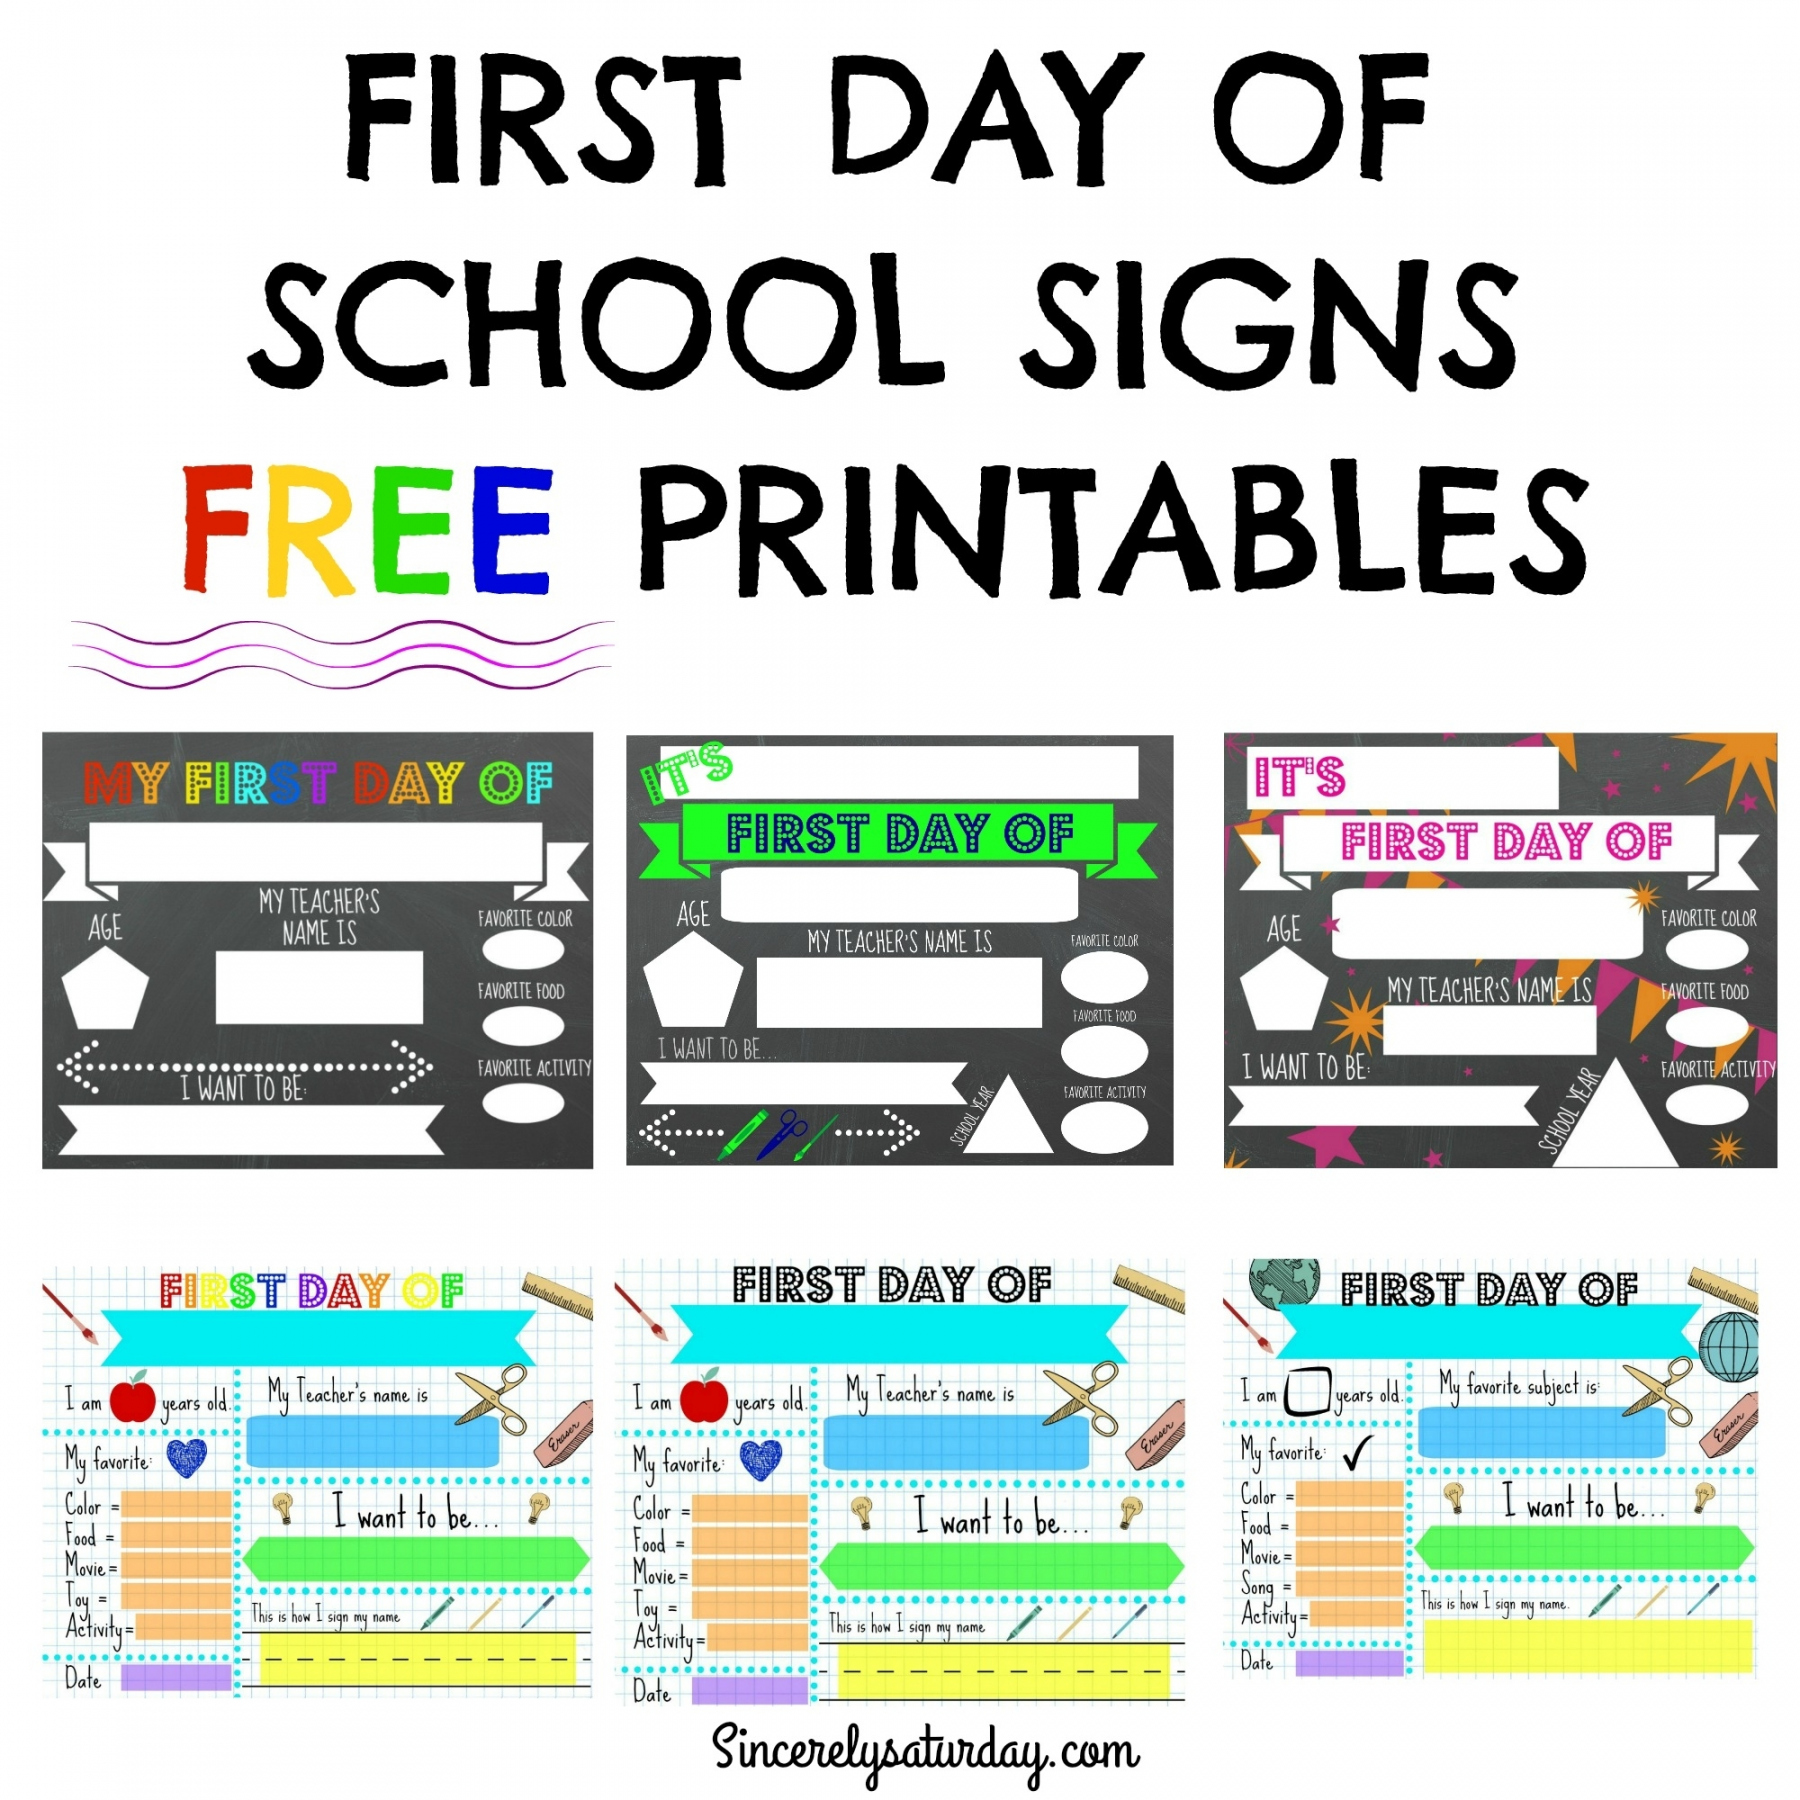 First Day of School Free Printables - Printable - FREE PRINTABLE FIRST DAY OF SCHOOL SIGNS - Sincerely Saturday